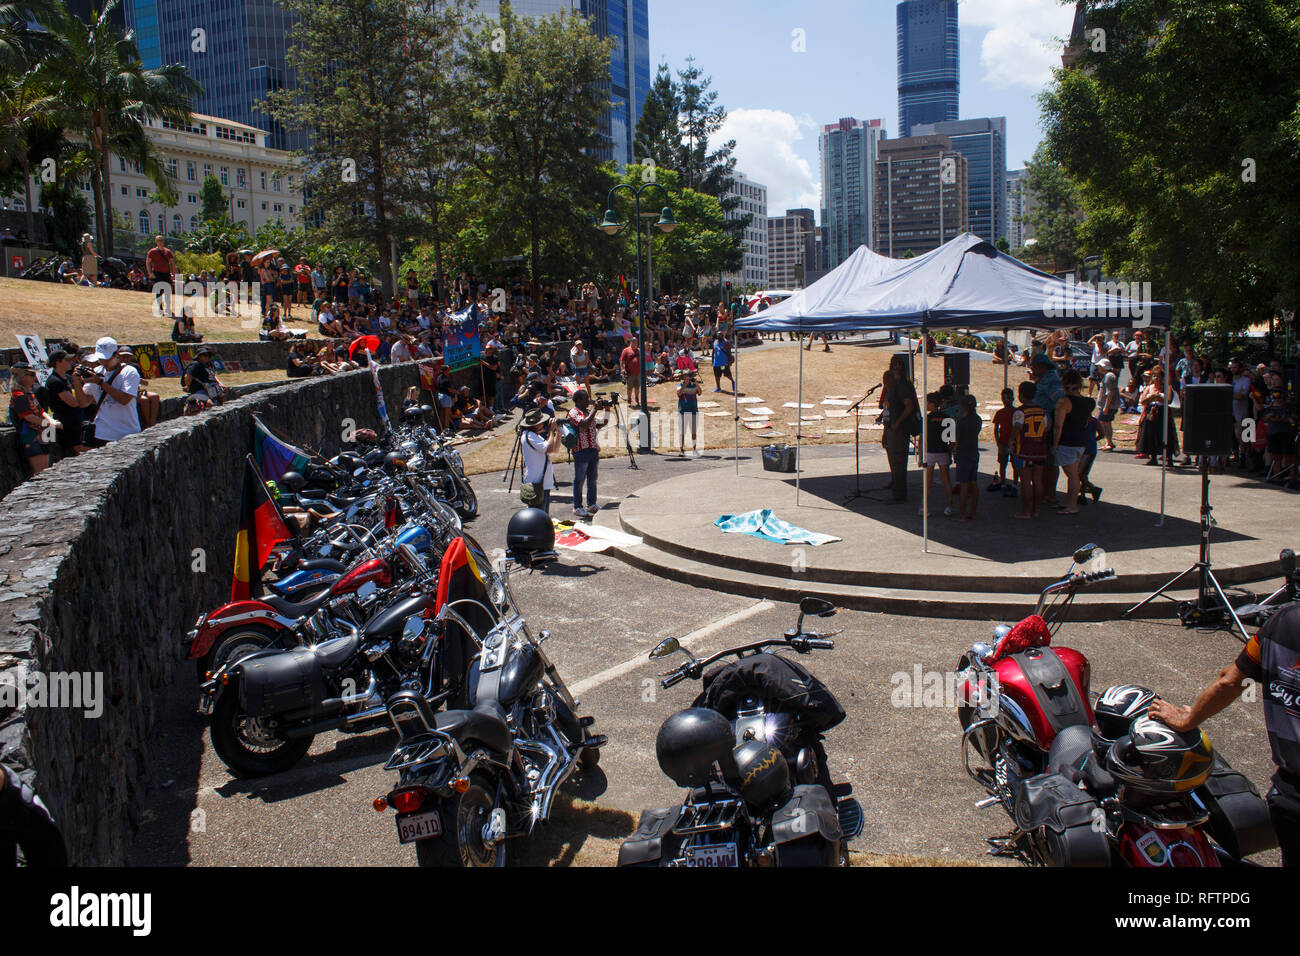 The motorcycles belonging to the Indigenous Riders Club of South East Queensland at the Invasion Day protest.  On the 26th of January, many Australians celebrate Australia day, but to many indigenous Australian people, it is a day synonymous with decades of systematic abuse and genocide. Several thousand protesters took the streets in Brisbane (known as Meanjin by local indigenous people) to rally for sovereignty rights and date changes. Stock Photo